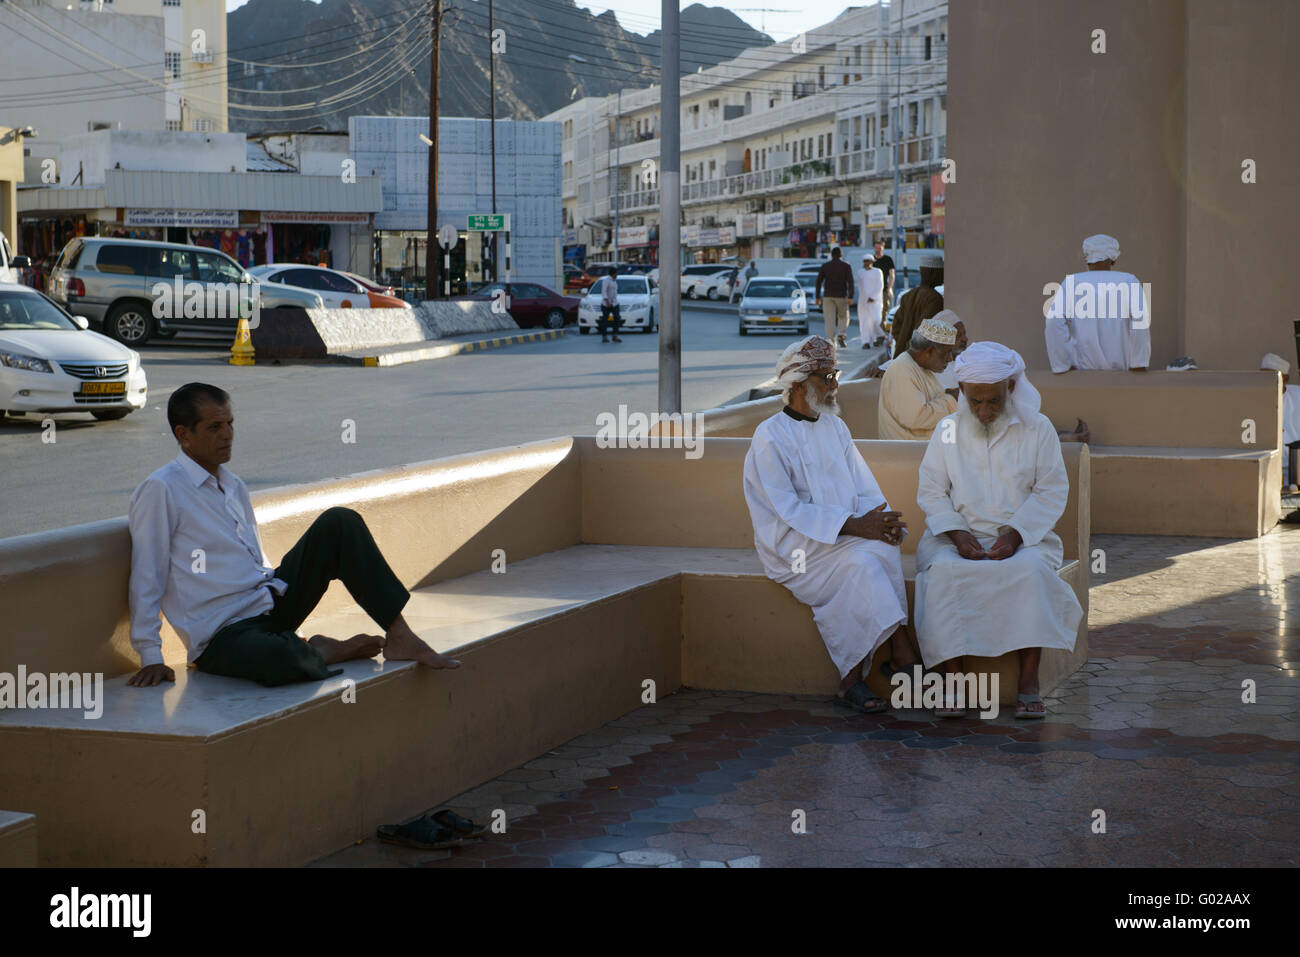 Omani men conversing on the streets of Muscat. Stock Photo